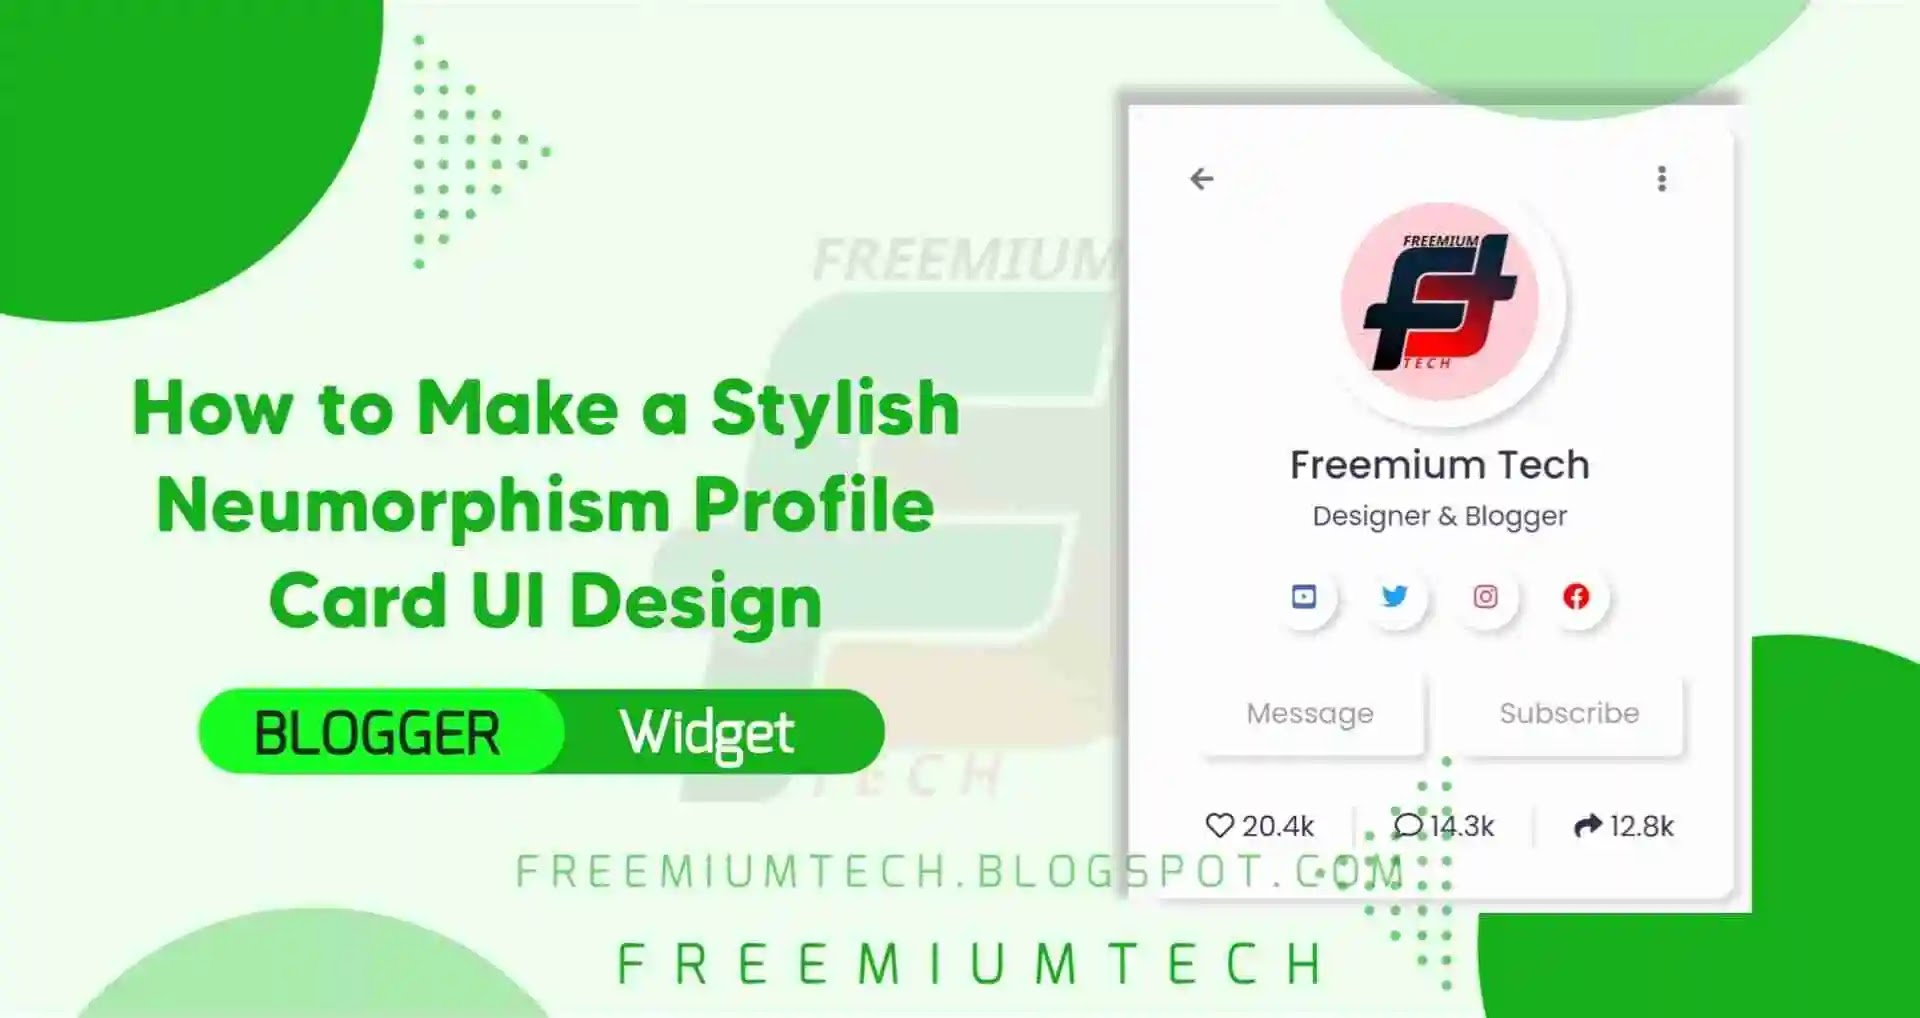 How to Make a Stylish Neumorphism Profile Card UI Design in blogger